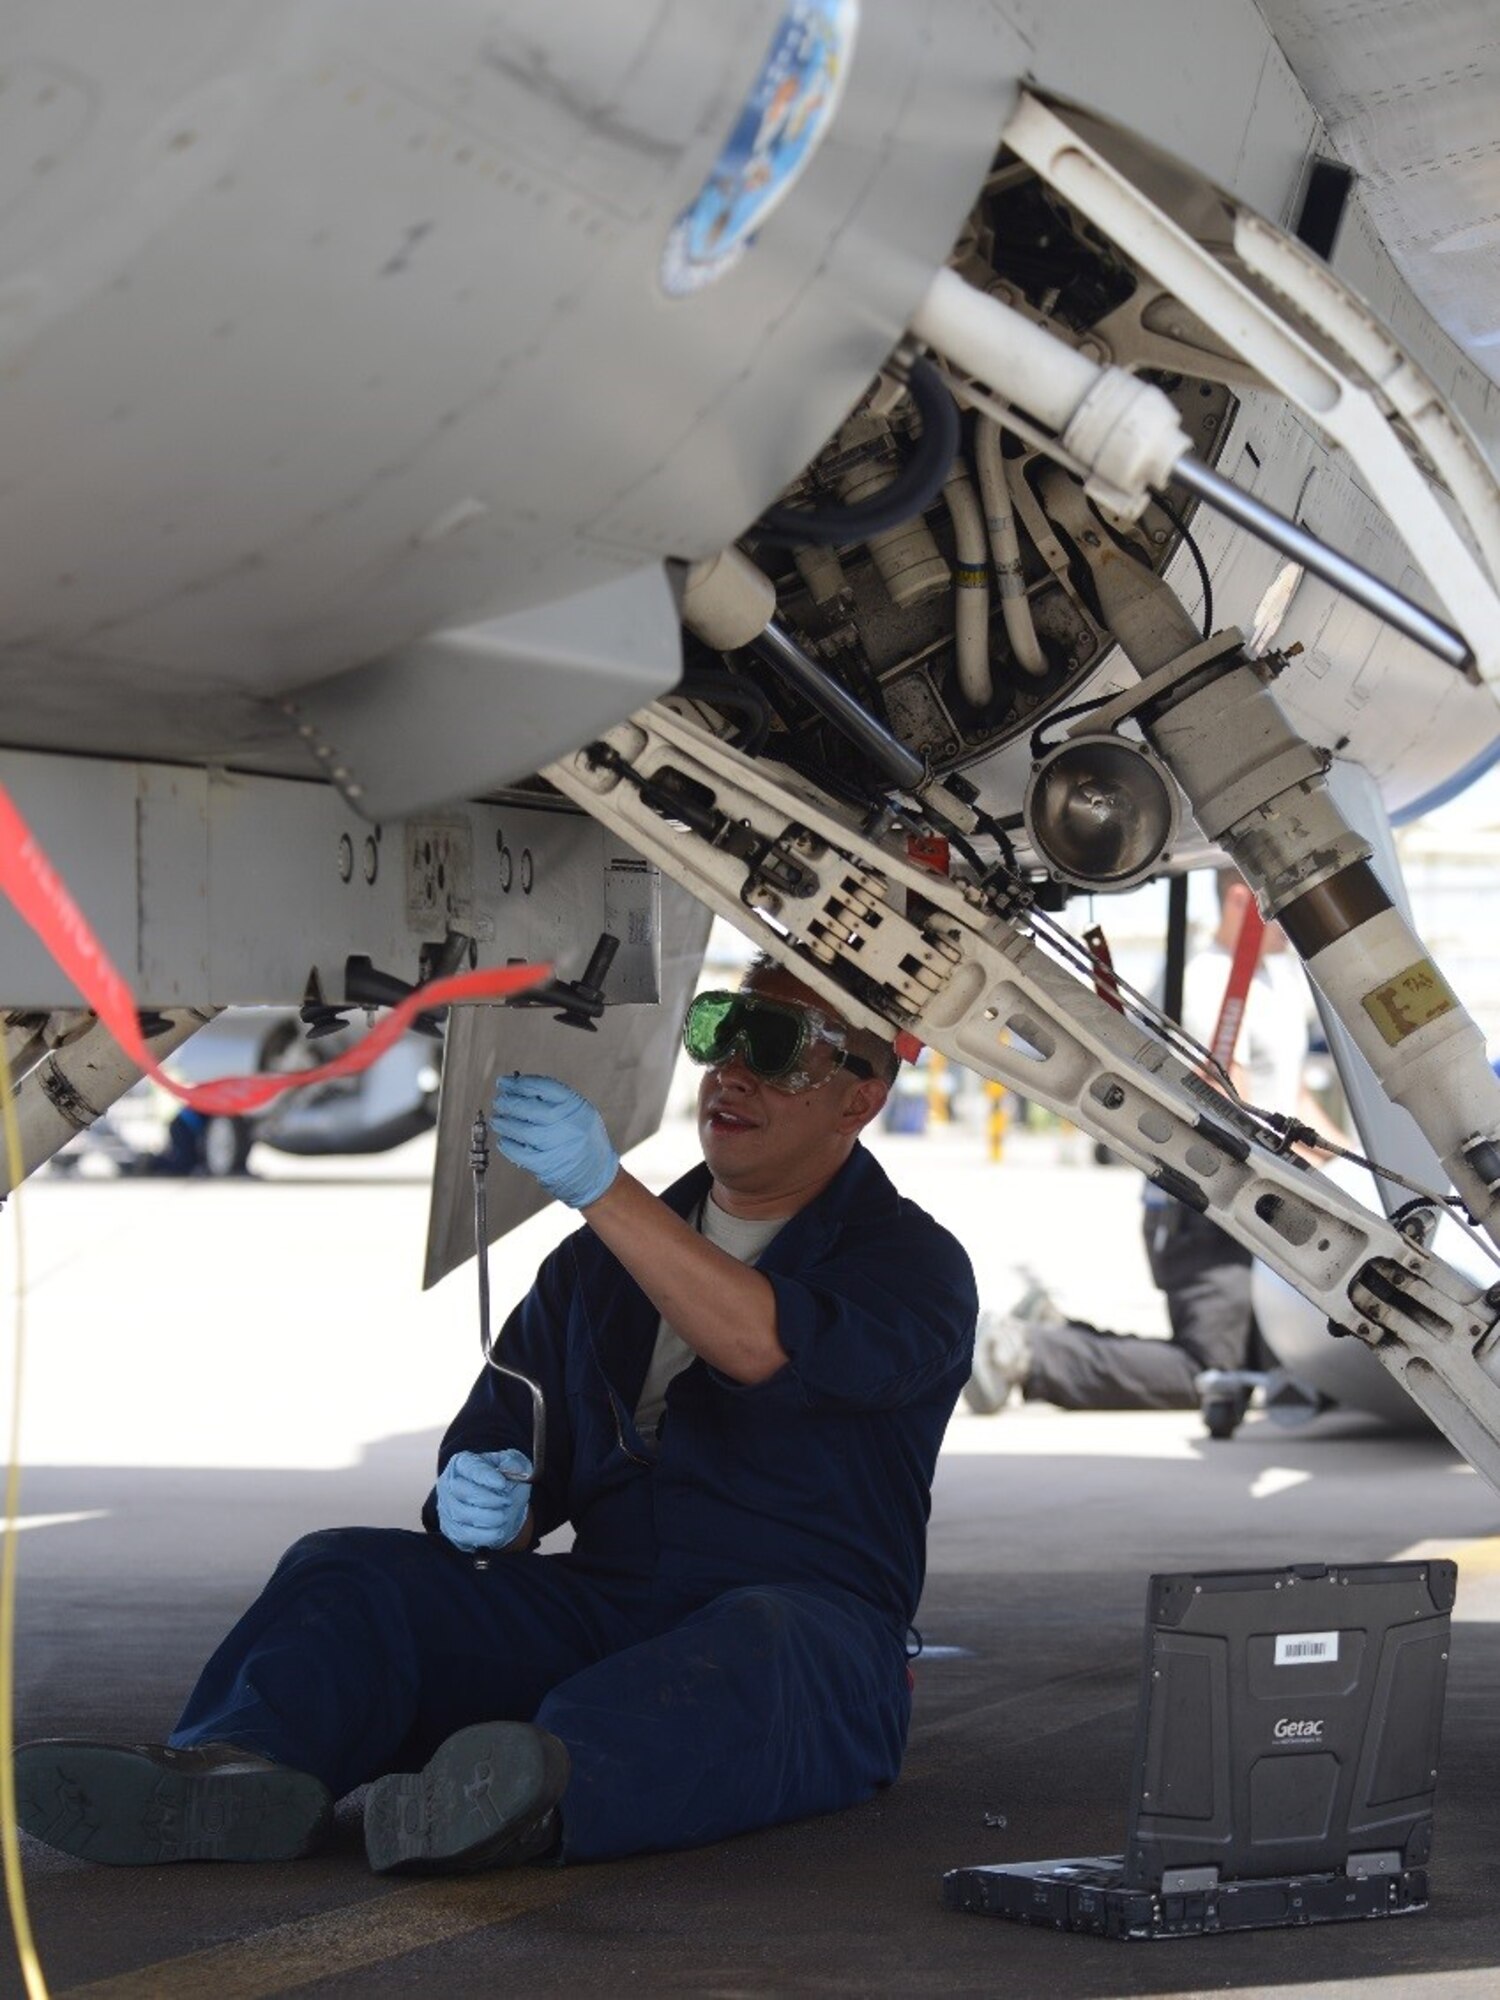 Tech. Sgt. Alejandro Mendoza Jr., 944th Detachment 1 tactical aircraft maintenance craftsman, removes a 300-gallon centerline external fuel tank on a Luke F-16 for a next mission aircraft configuration requirement at Luke Air Force Base, Ariz. (U.S. Air Force photo by Staff Sgt. Denise Willhite)